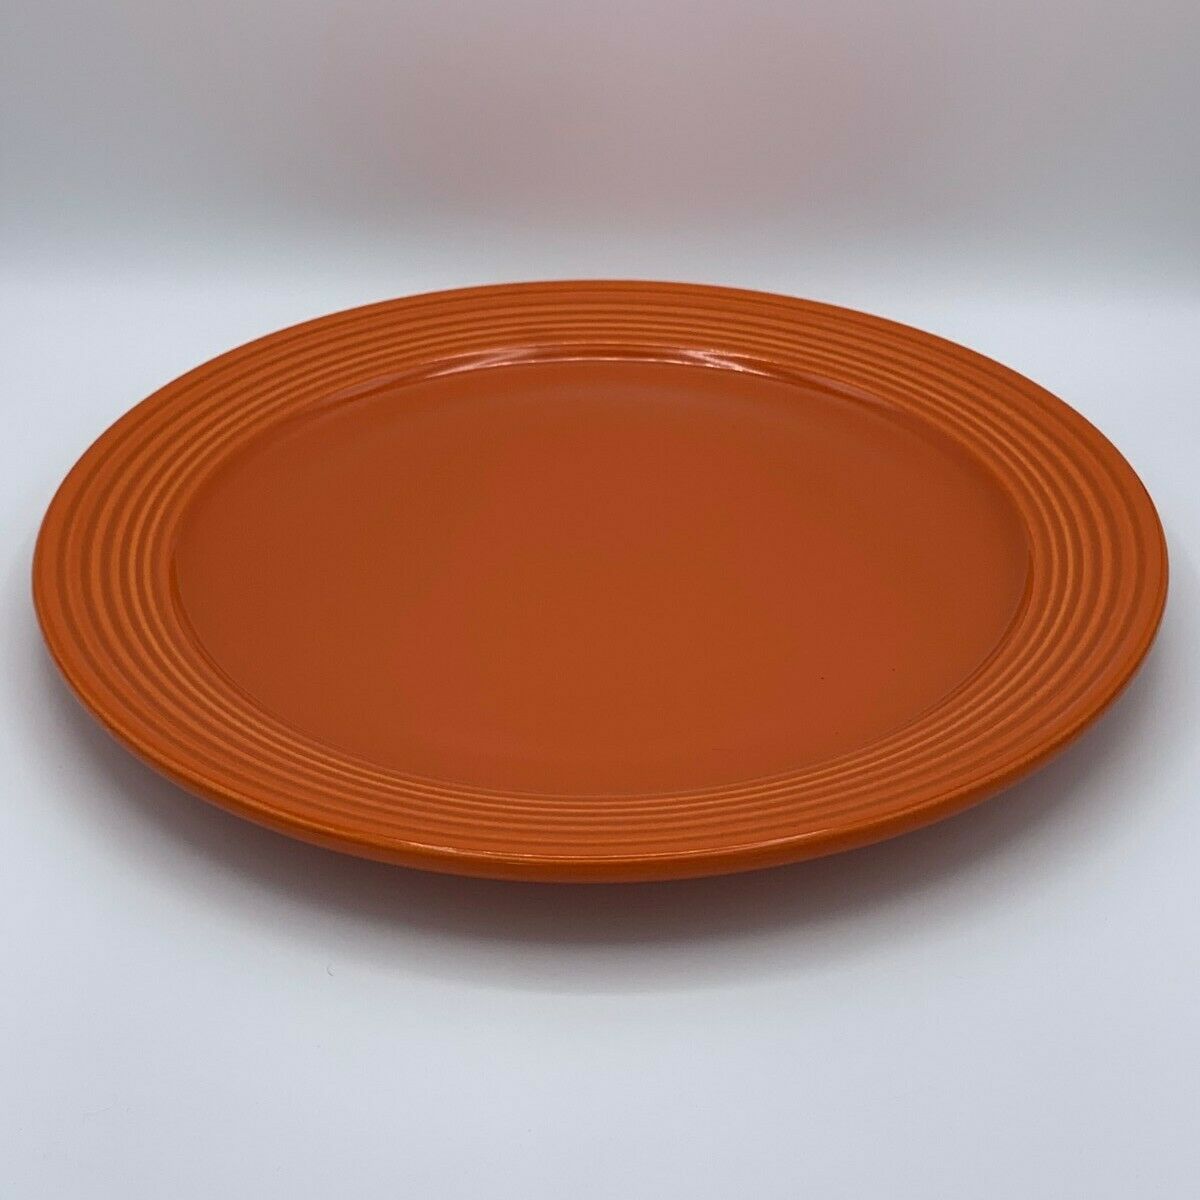 Vintage Bauer Pottery Orange-Red Platter/Chop Plate 13 inches